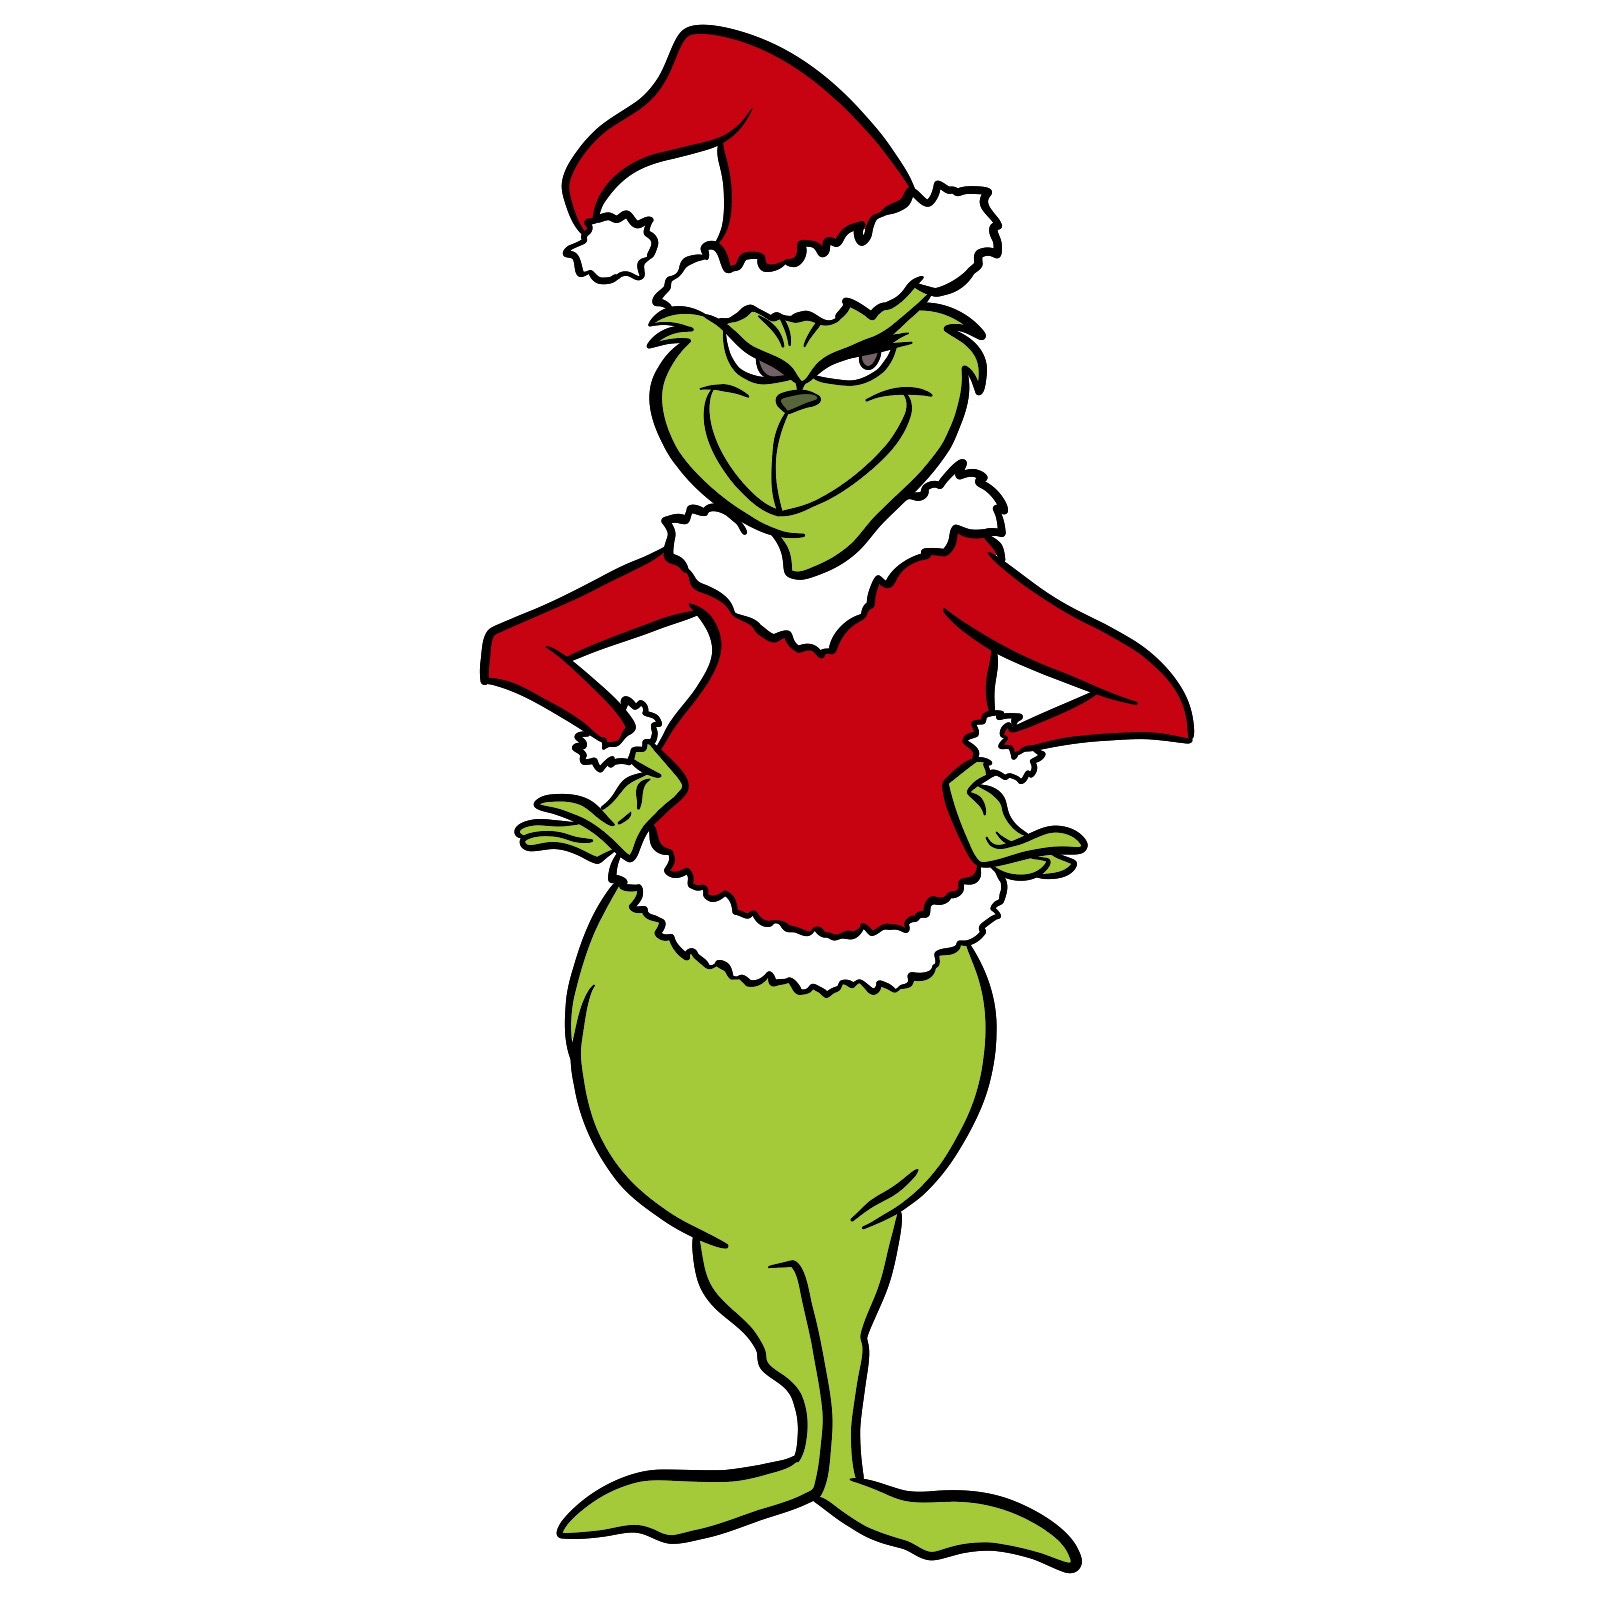 How to draw The Grinch in a Christmas costume - step 29